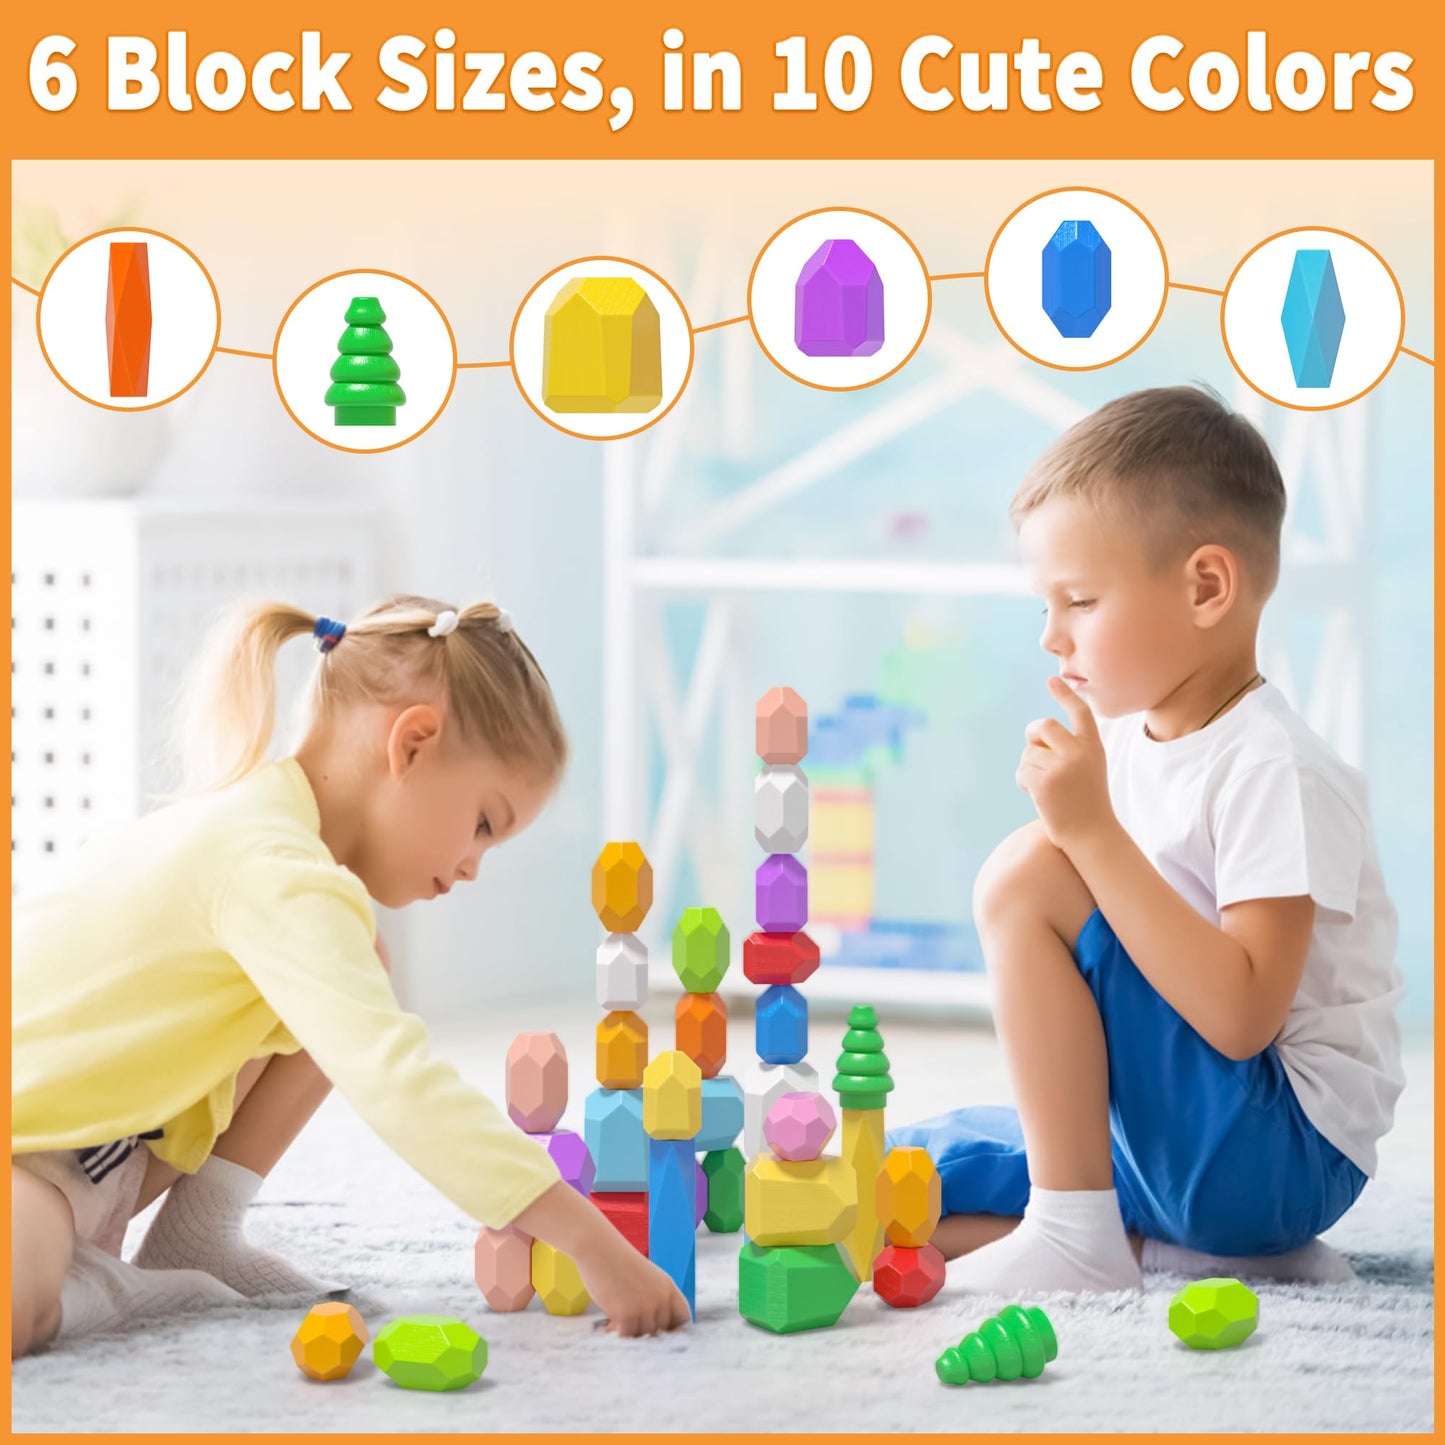 40PCS Wooden Stacking Rocks Toys, Montessori Toys for 1 2 3 year old, Stacking toys for Toddlers, Sensory STEM Preschool Learning Building Blocks